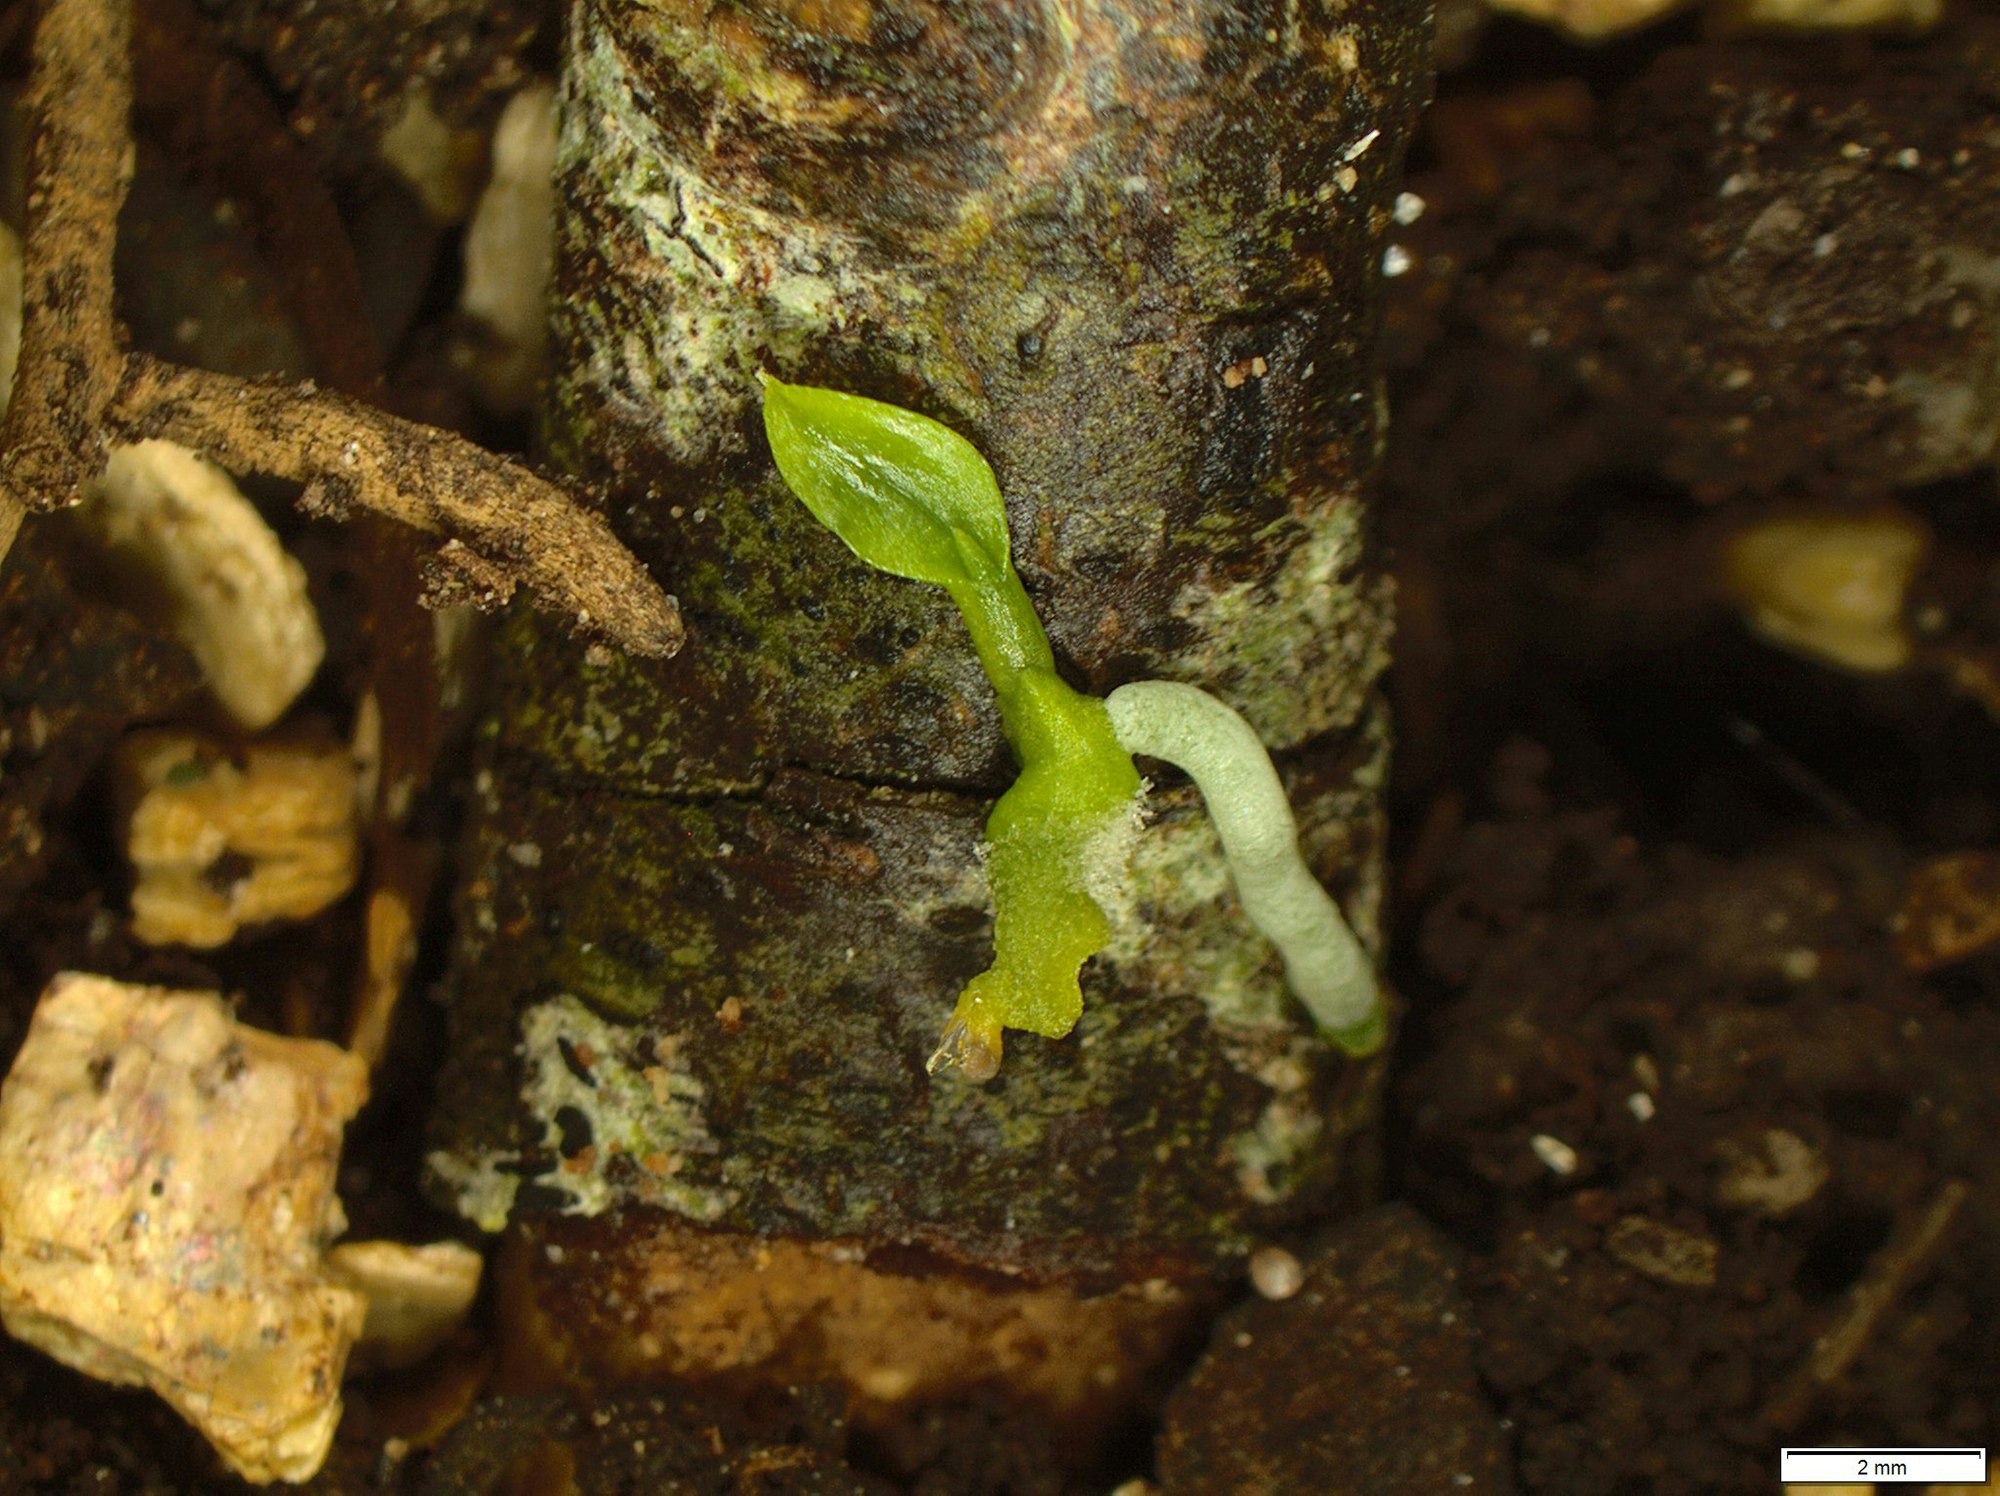 Close up of a small green frond growing on a tree trunk